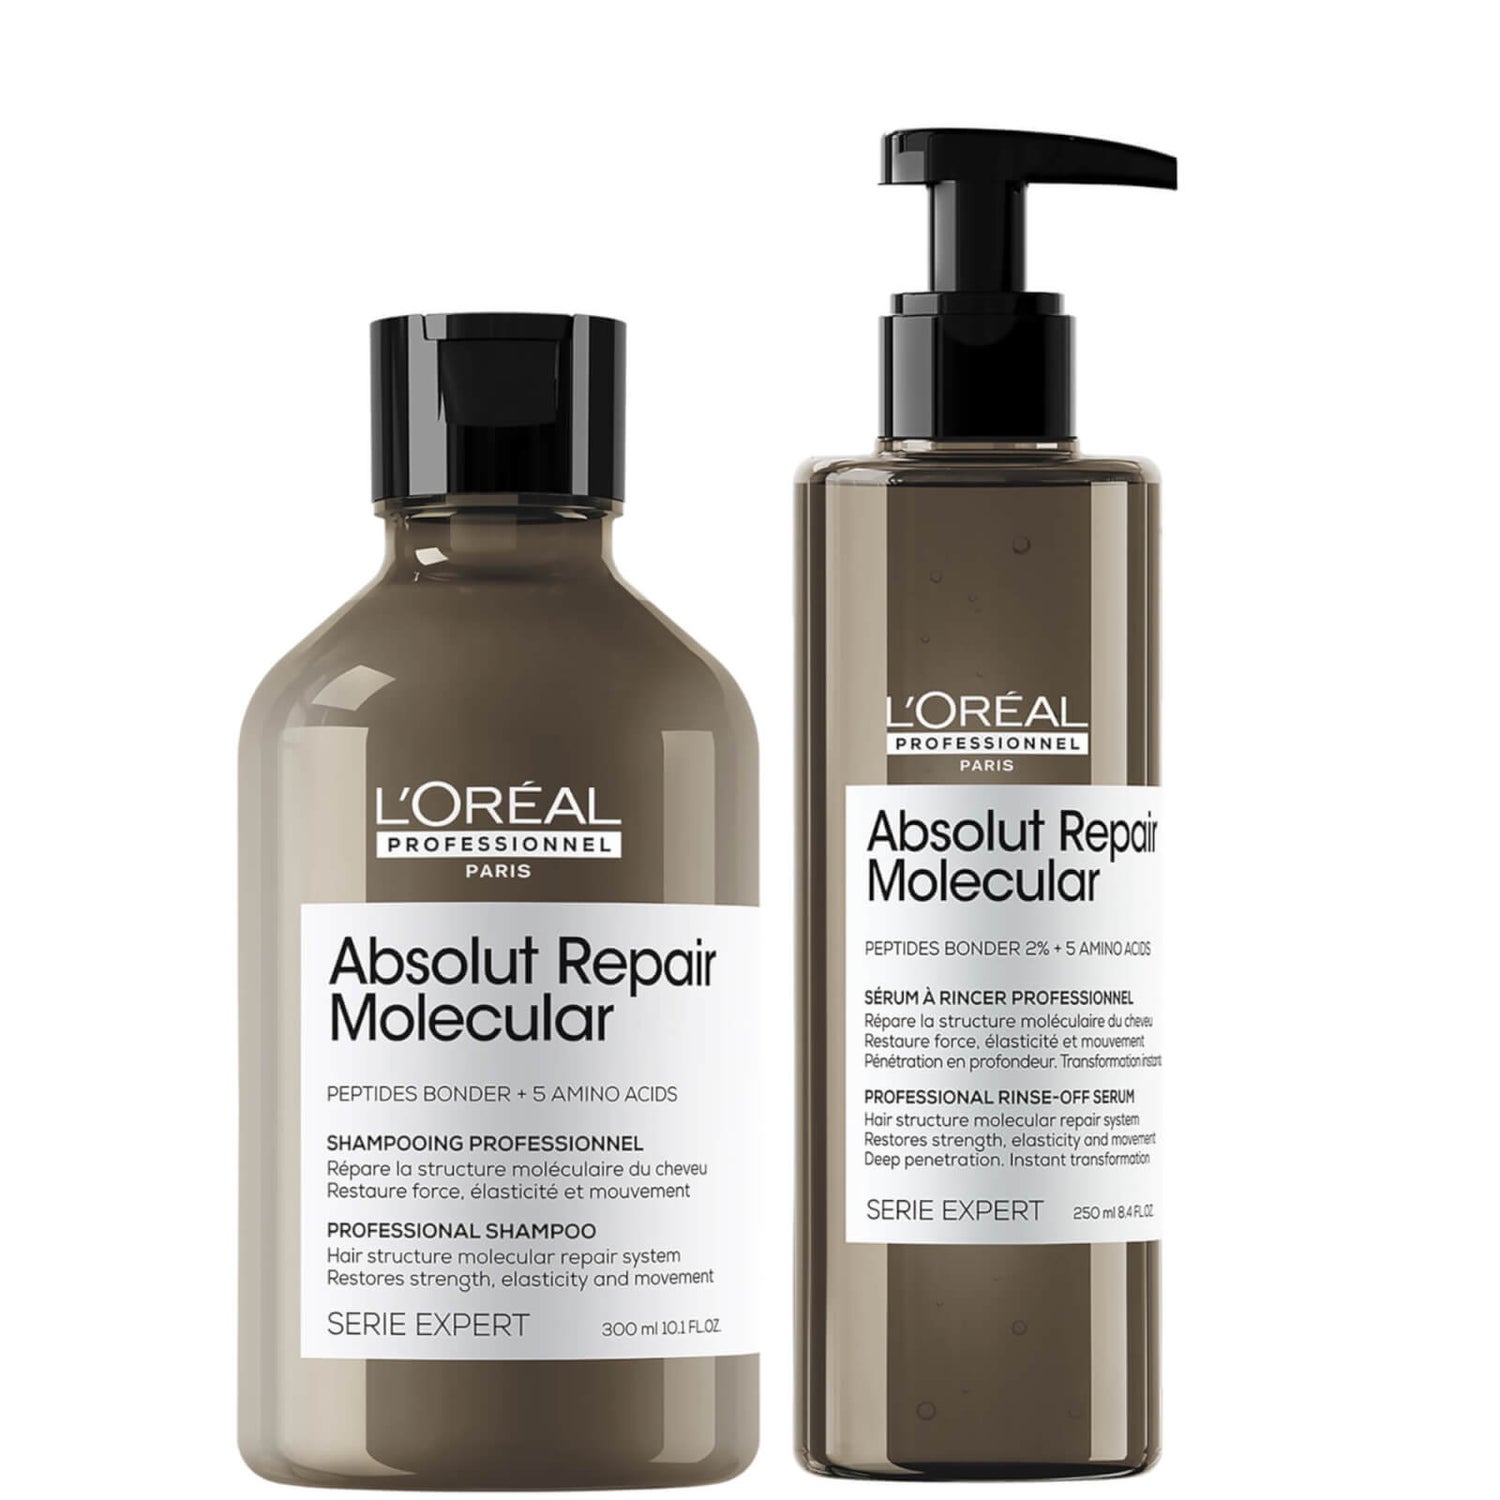 L'Oréal Professionnel Serie Expert Absolut Repair Molecular Shampoo and Rinse-off Serum Duo for Damaged Hair